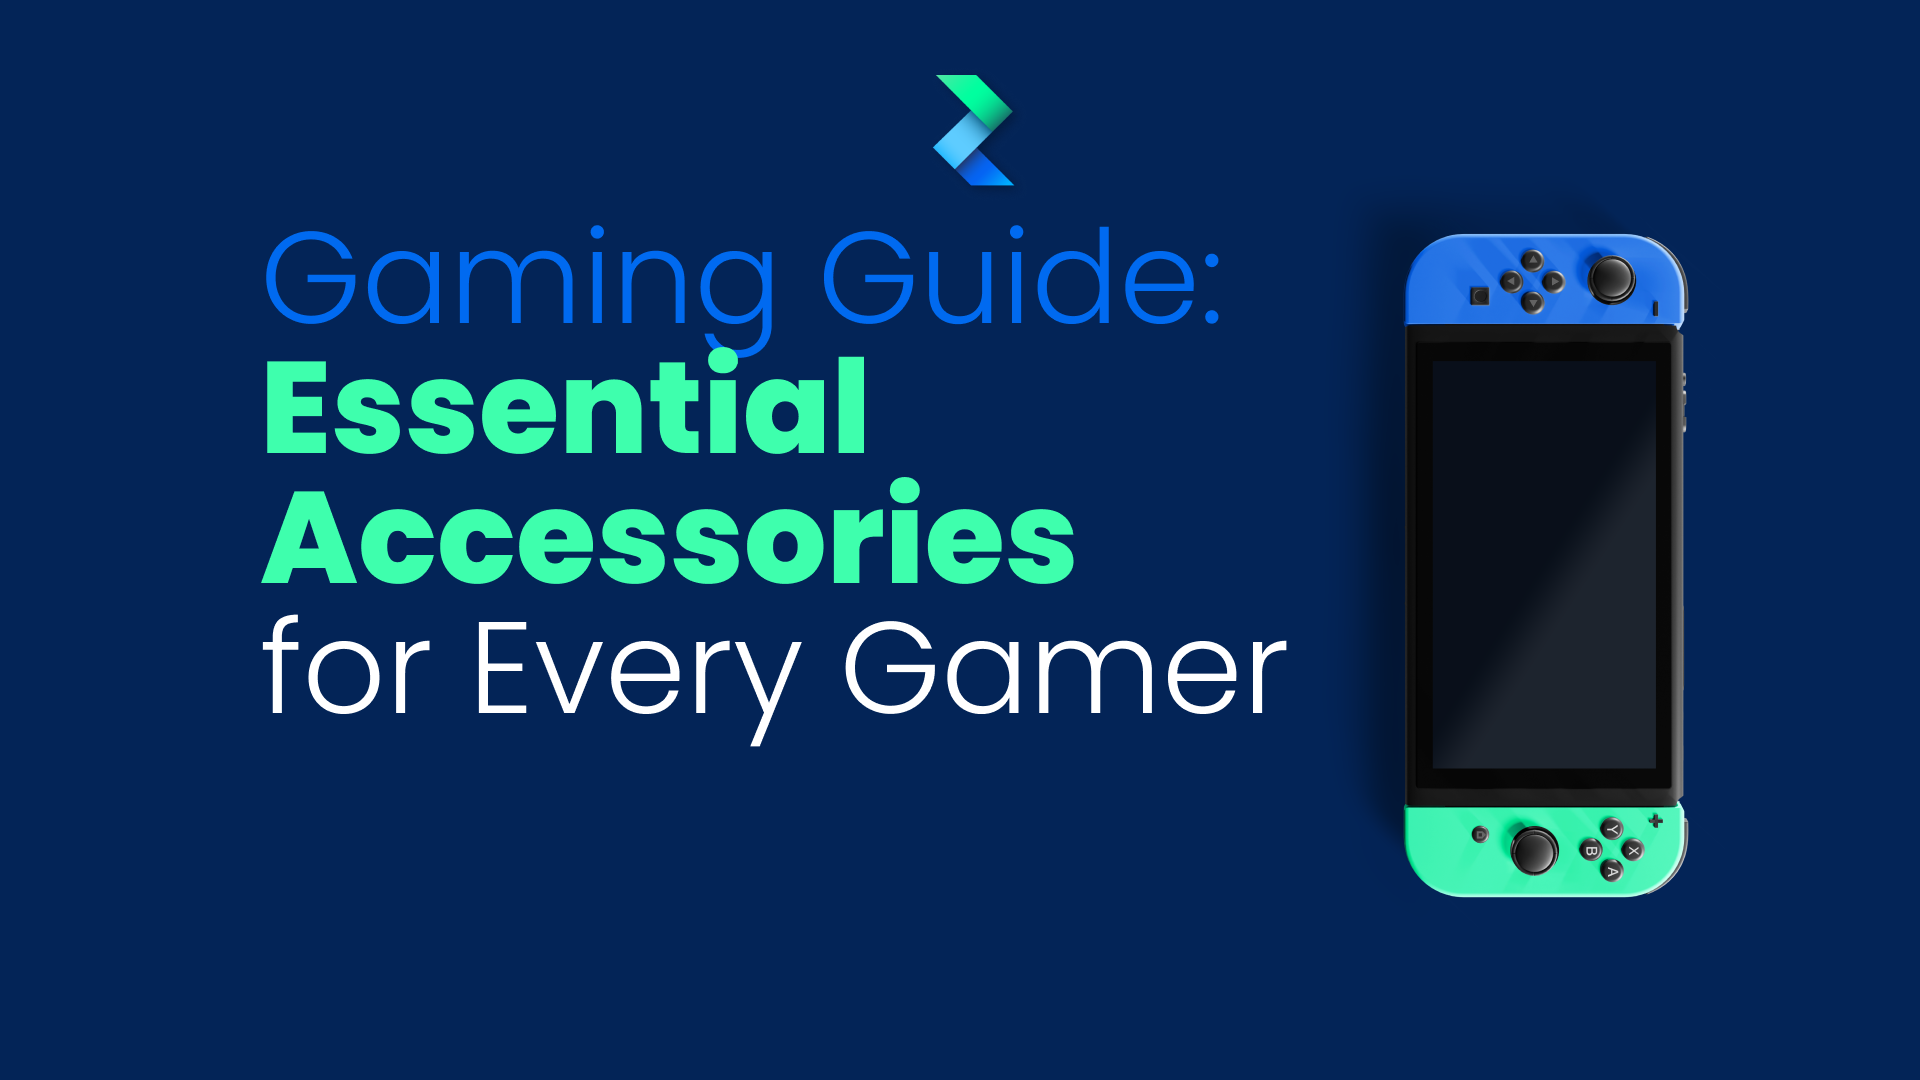 Gaming Gear Guide: Essential Accessories for Every Gamer